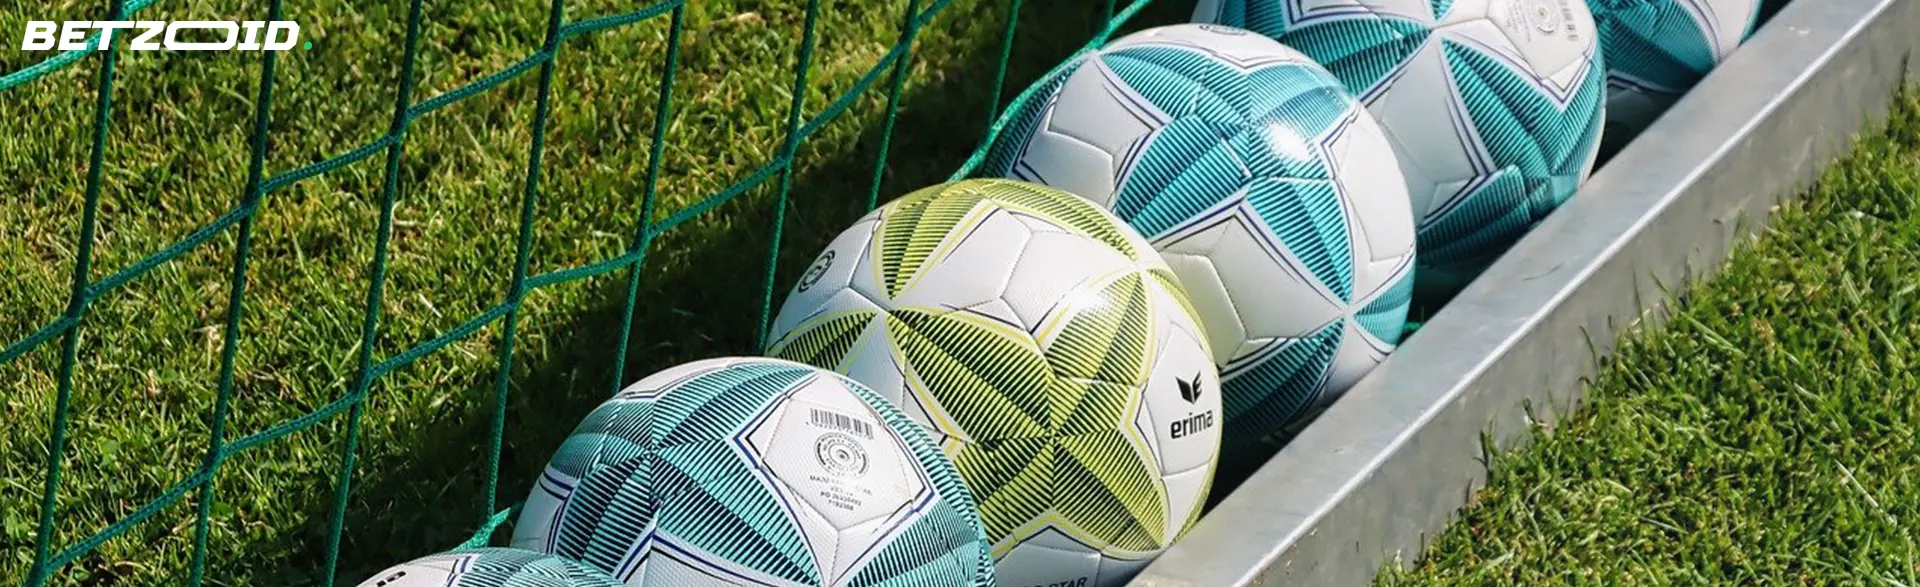 A vibrant display of variously designed footballs lined up behind the goal net on a grassy field.